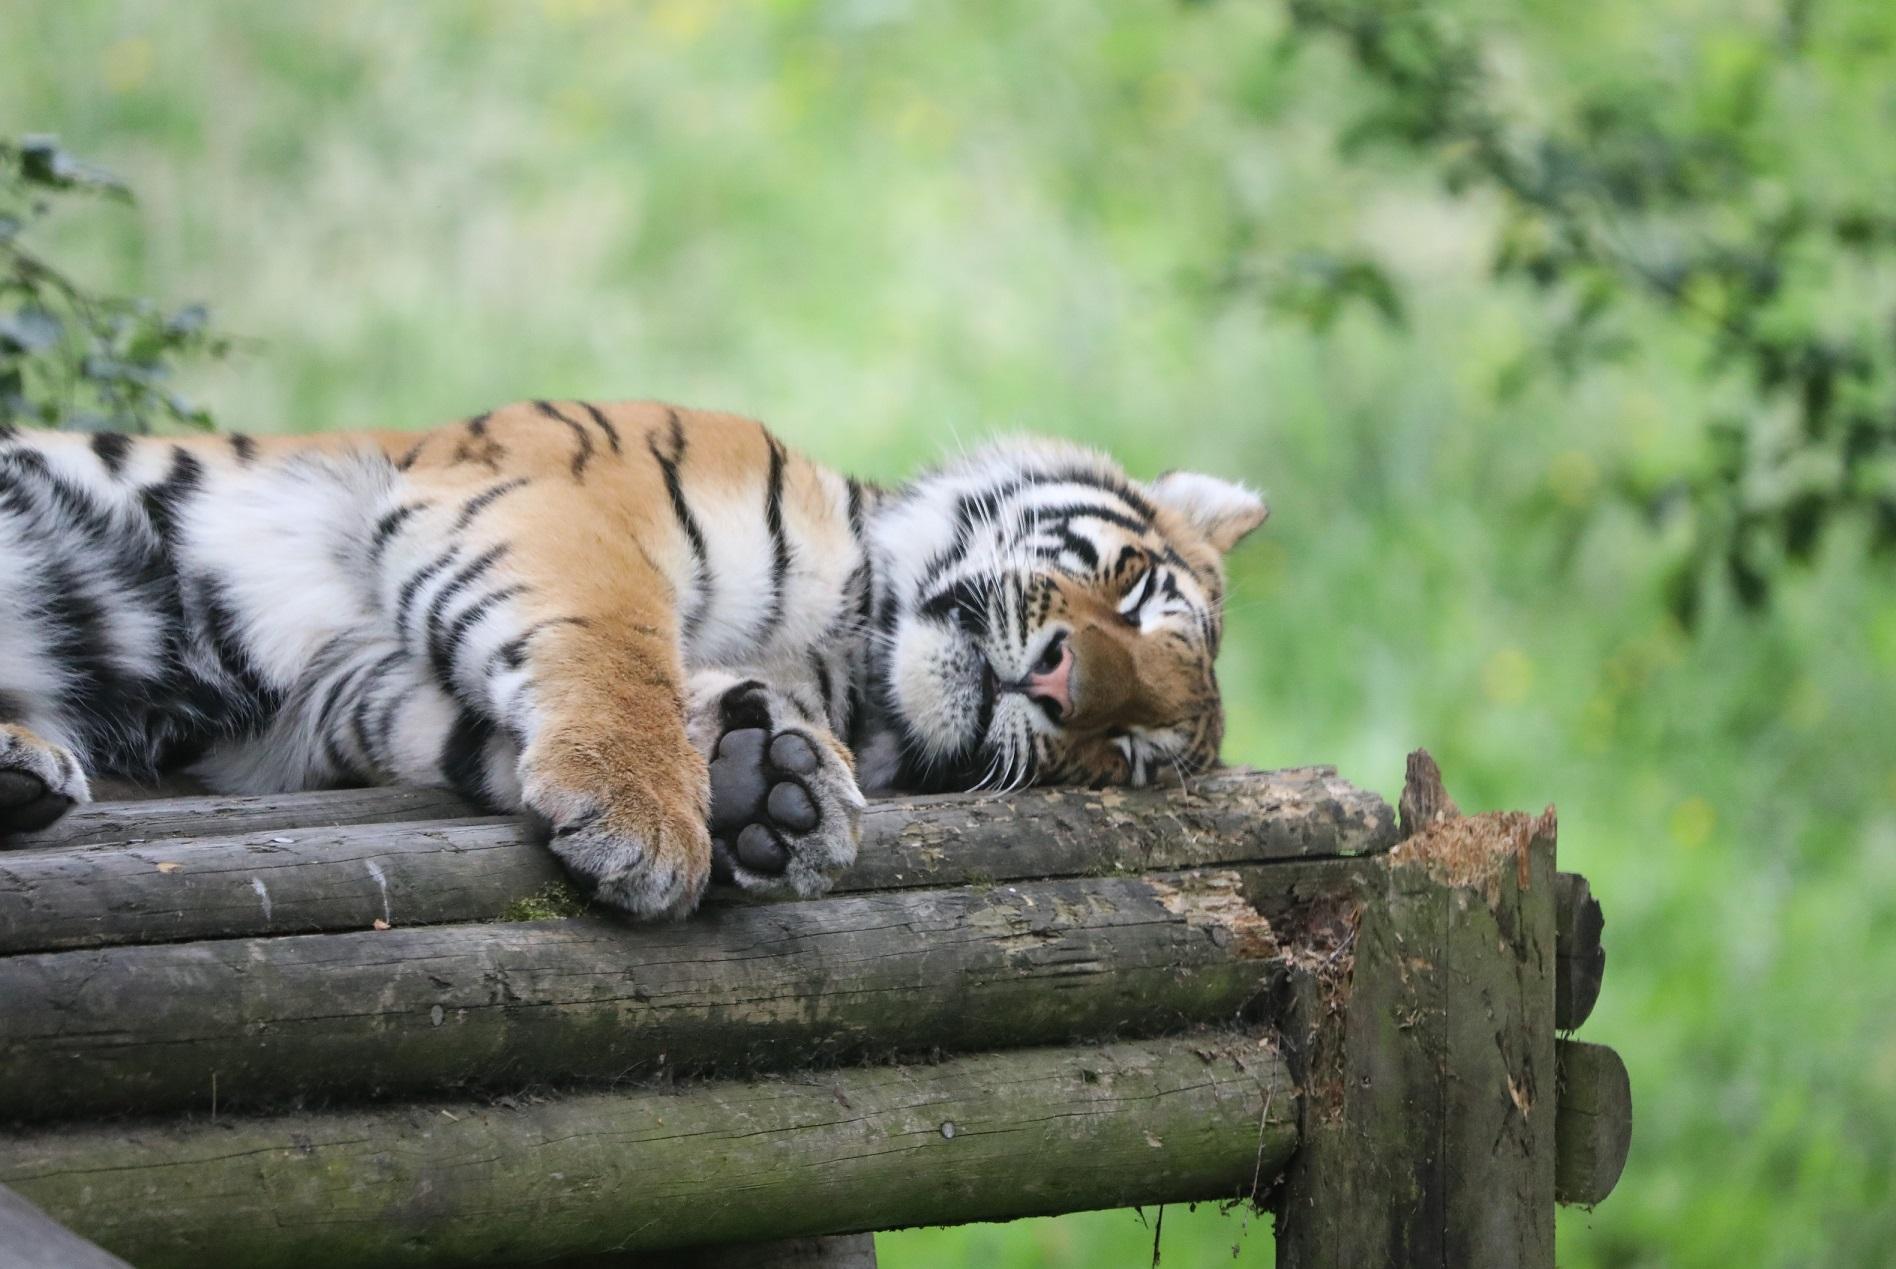 Amur tiger lying in grass Image: Amy Middleton